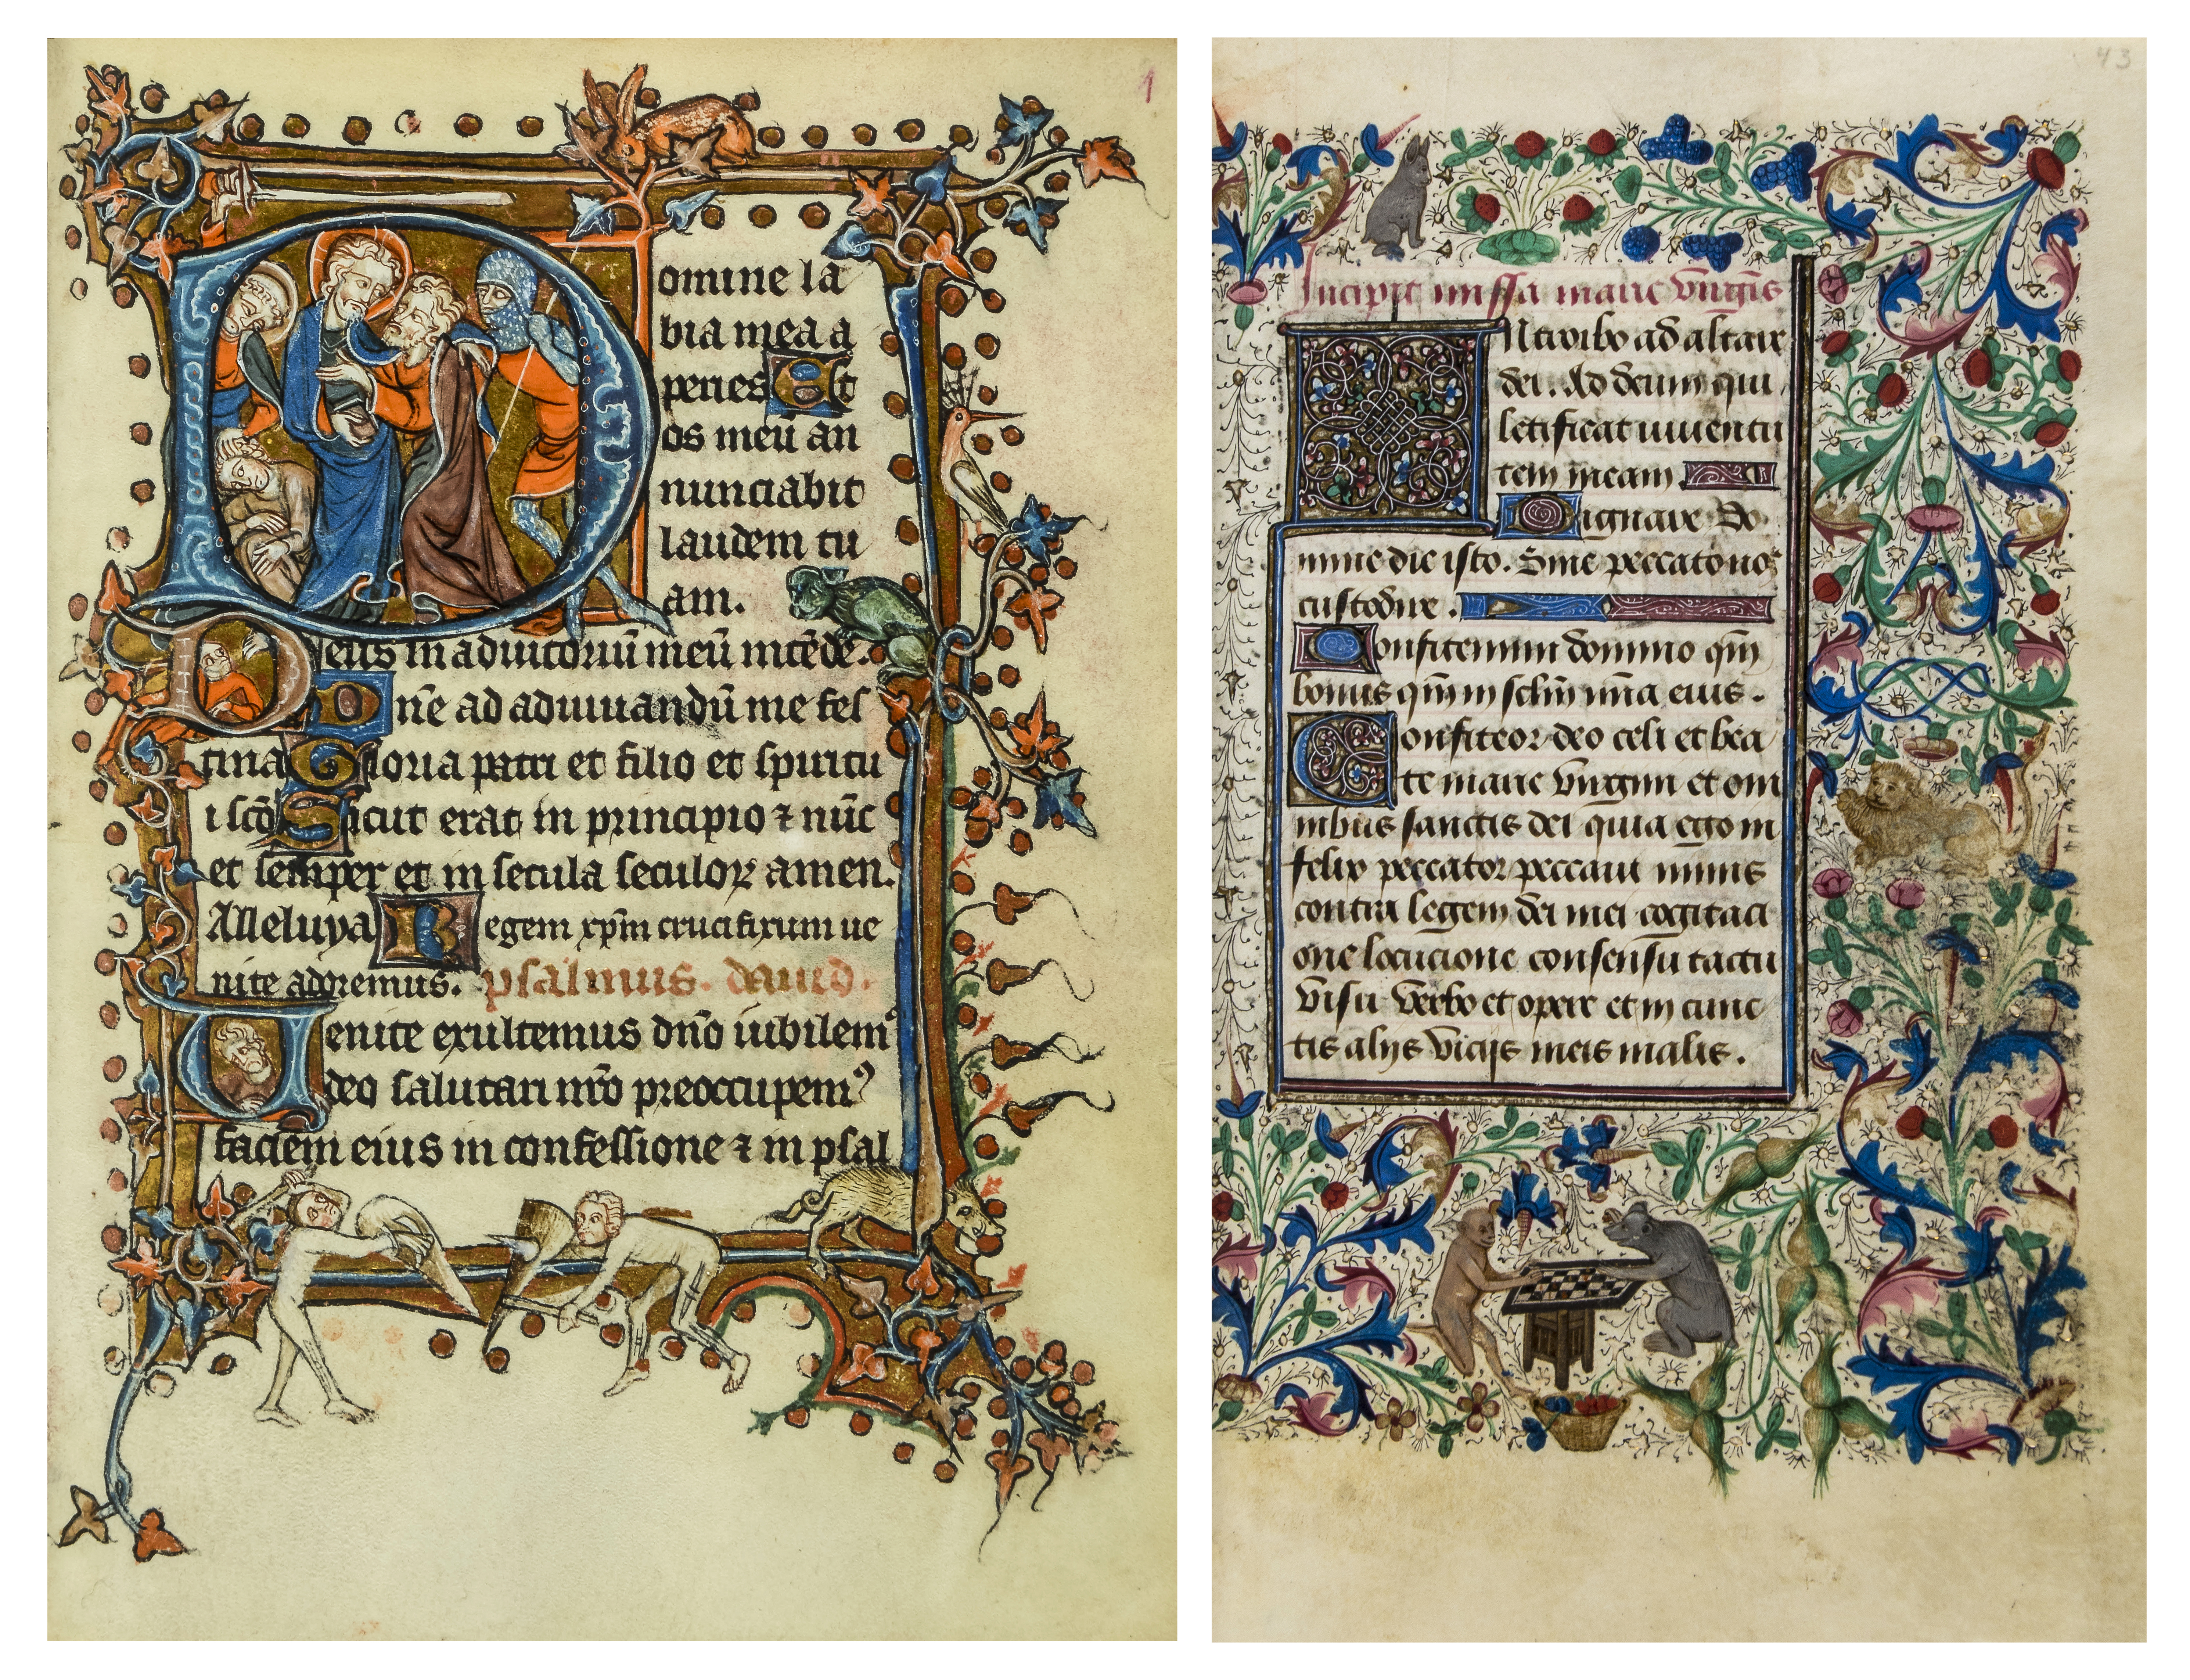 The Hours of the Cross (left) in Latin, opulently illuminated manuscript on parchment, northeast France, first half of 14th century, 24 leaves. Estimate: £40,000–£60,000. Book of Hours (right) with numerous other devotional texts in Latin and French, illuminated manuscript on parchment, southern Netherlands, circa 1460, 313 leaves. Estimate: £30,000–£50,000. Bloomsbury Auctions images